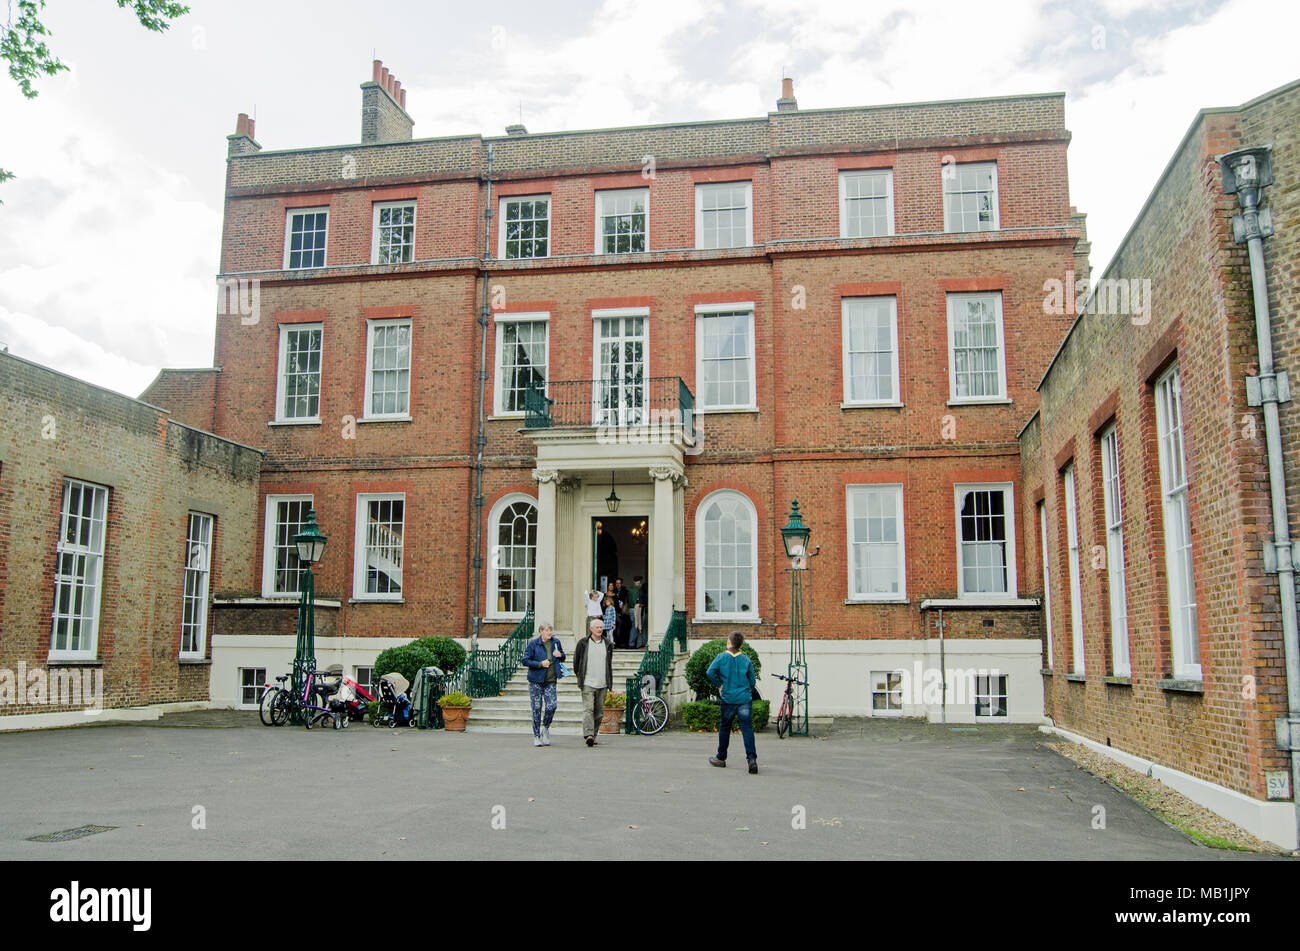 LONDON, UK - SEPTEMBER 17, 2017: Visitors at the entrance to the historic Bushy House, part of the National Physical Laboratory, on an open day in Sep Stock Photo